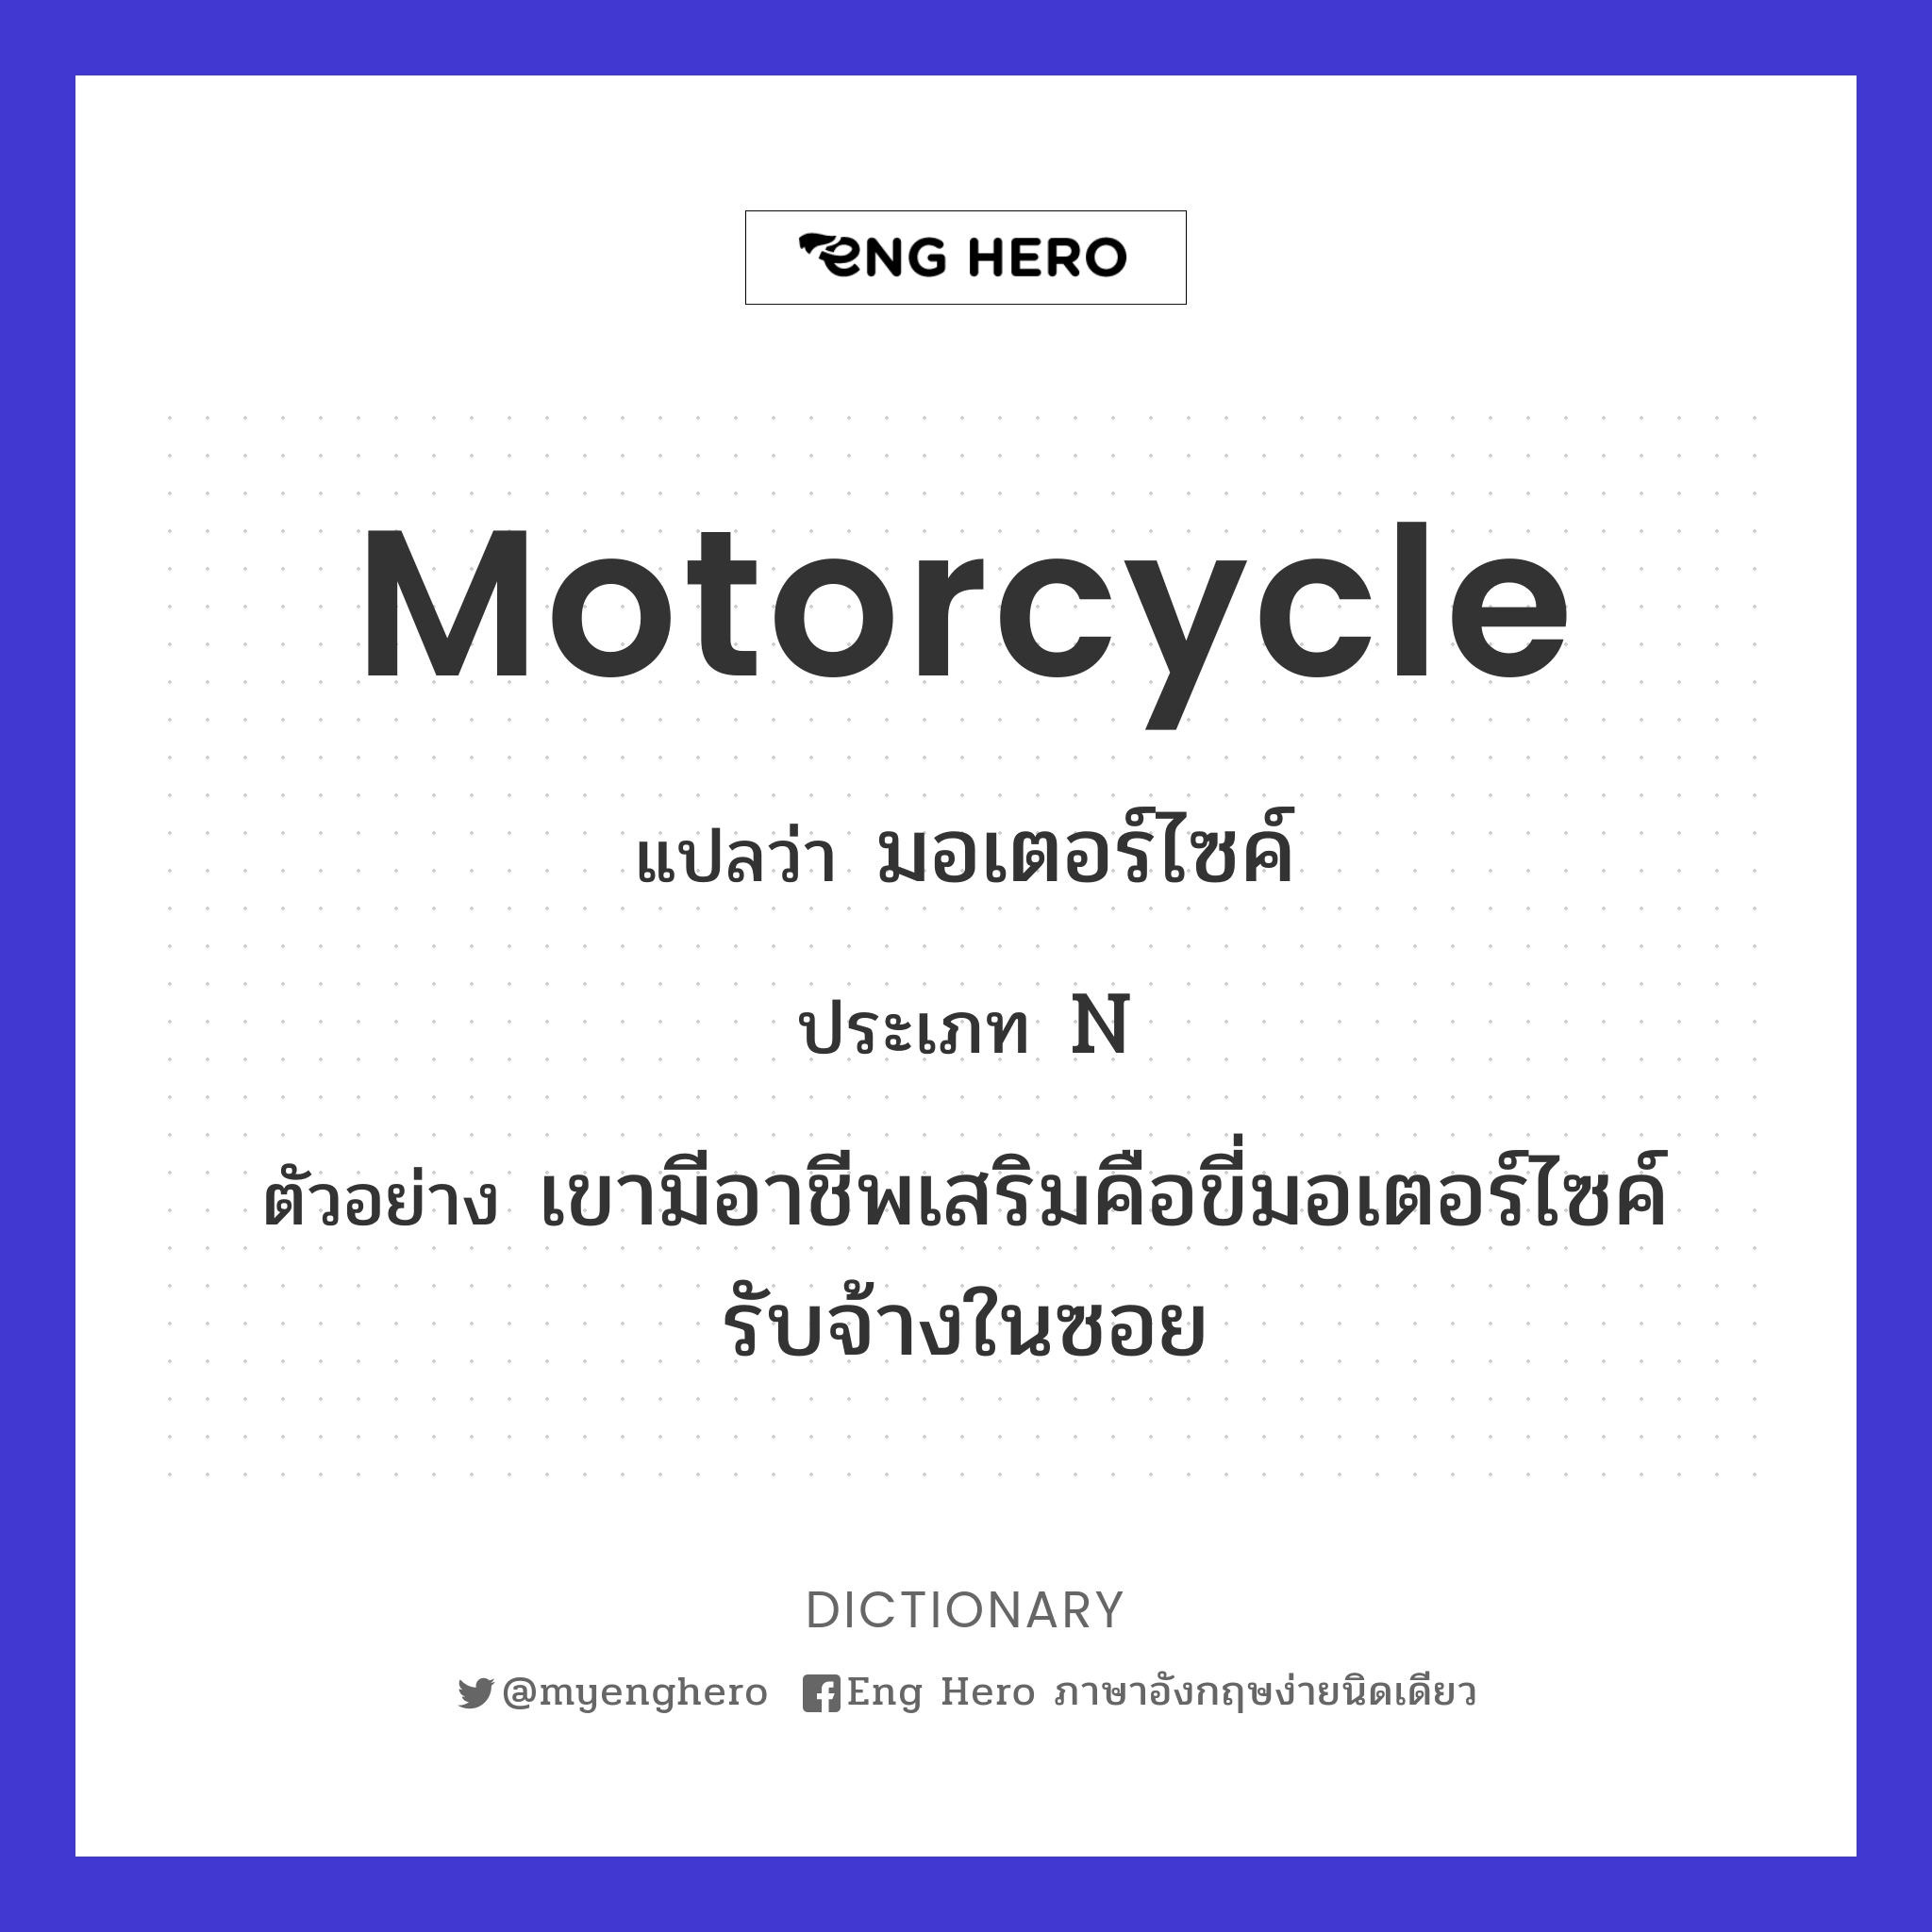 motorcycle